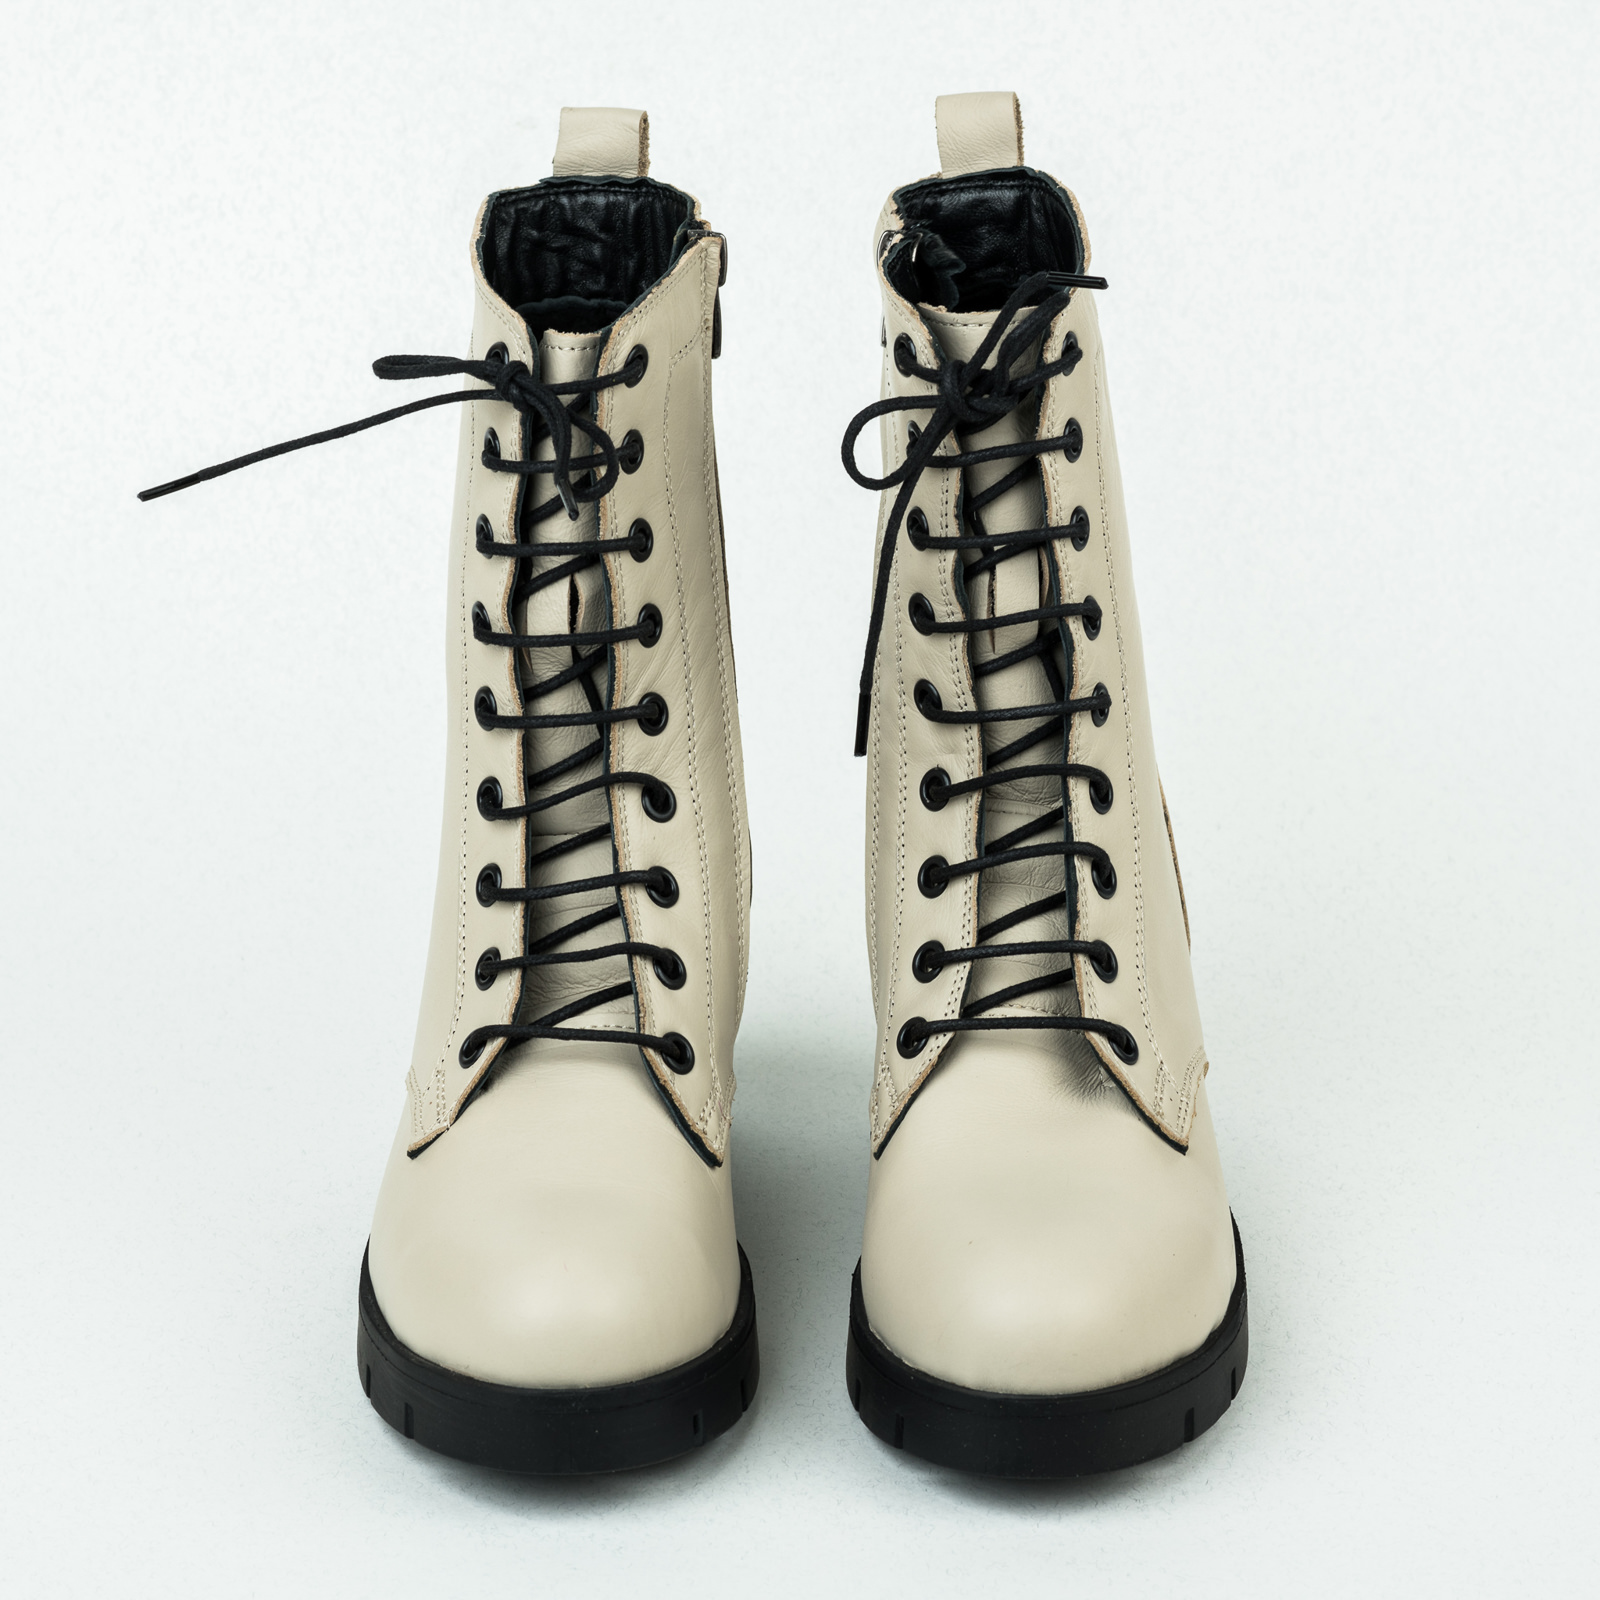 Leather ankle boots B054 - LIGHT BEIGE